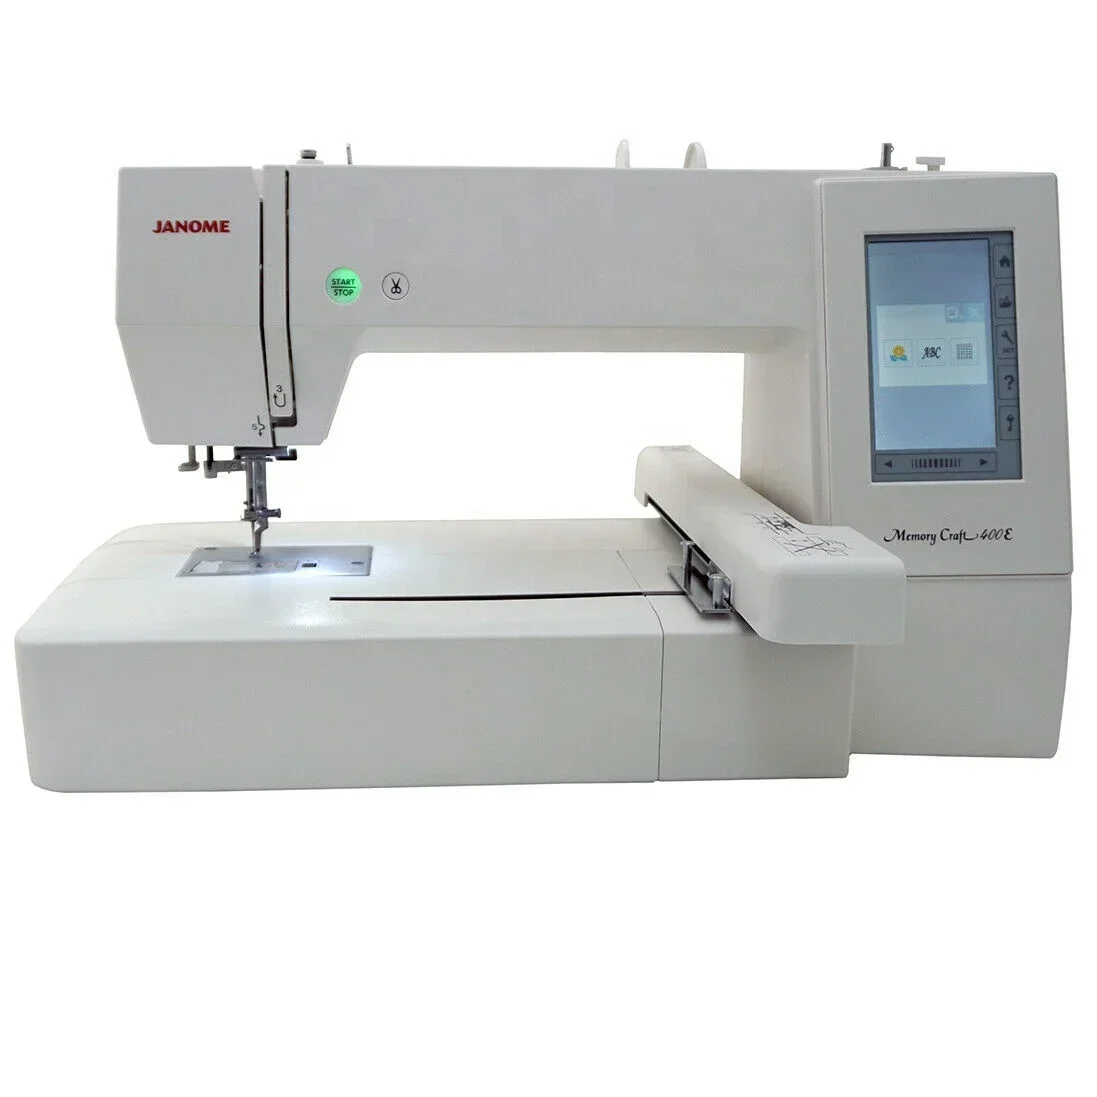 

SUMMER SALES DISCOUNT ON Buy With Confidence New Original Activities Janome Memory Craft 400E Embroidery Machine with Exclusive